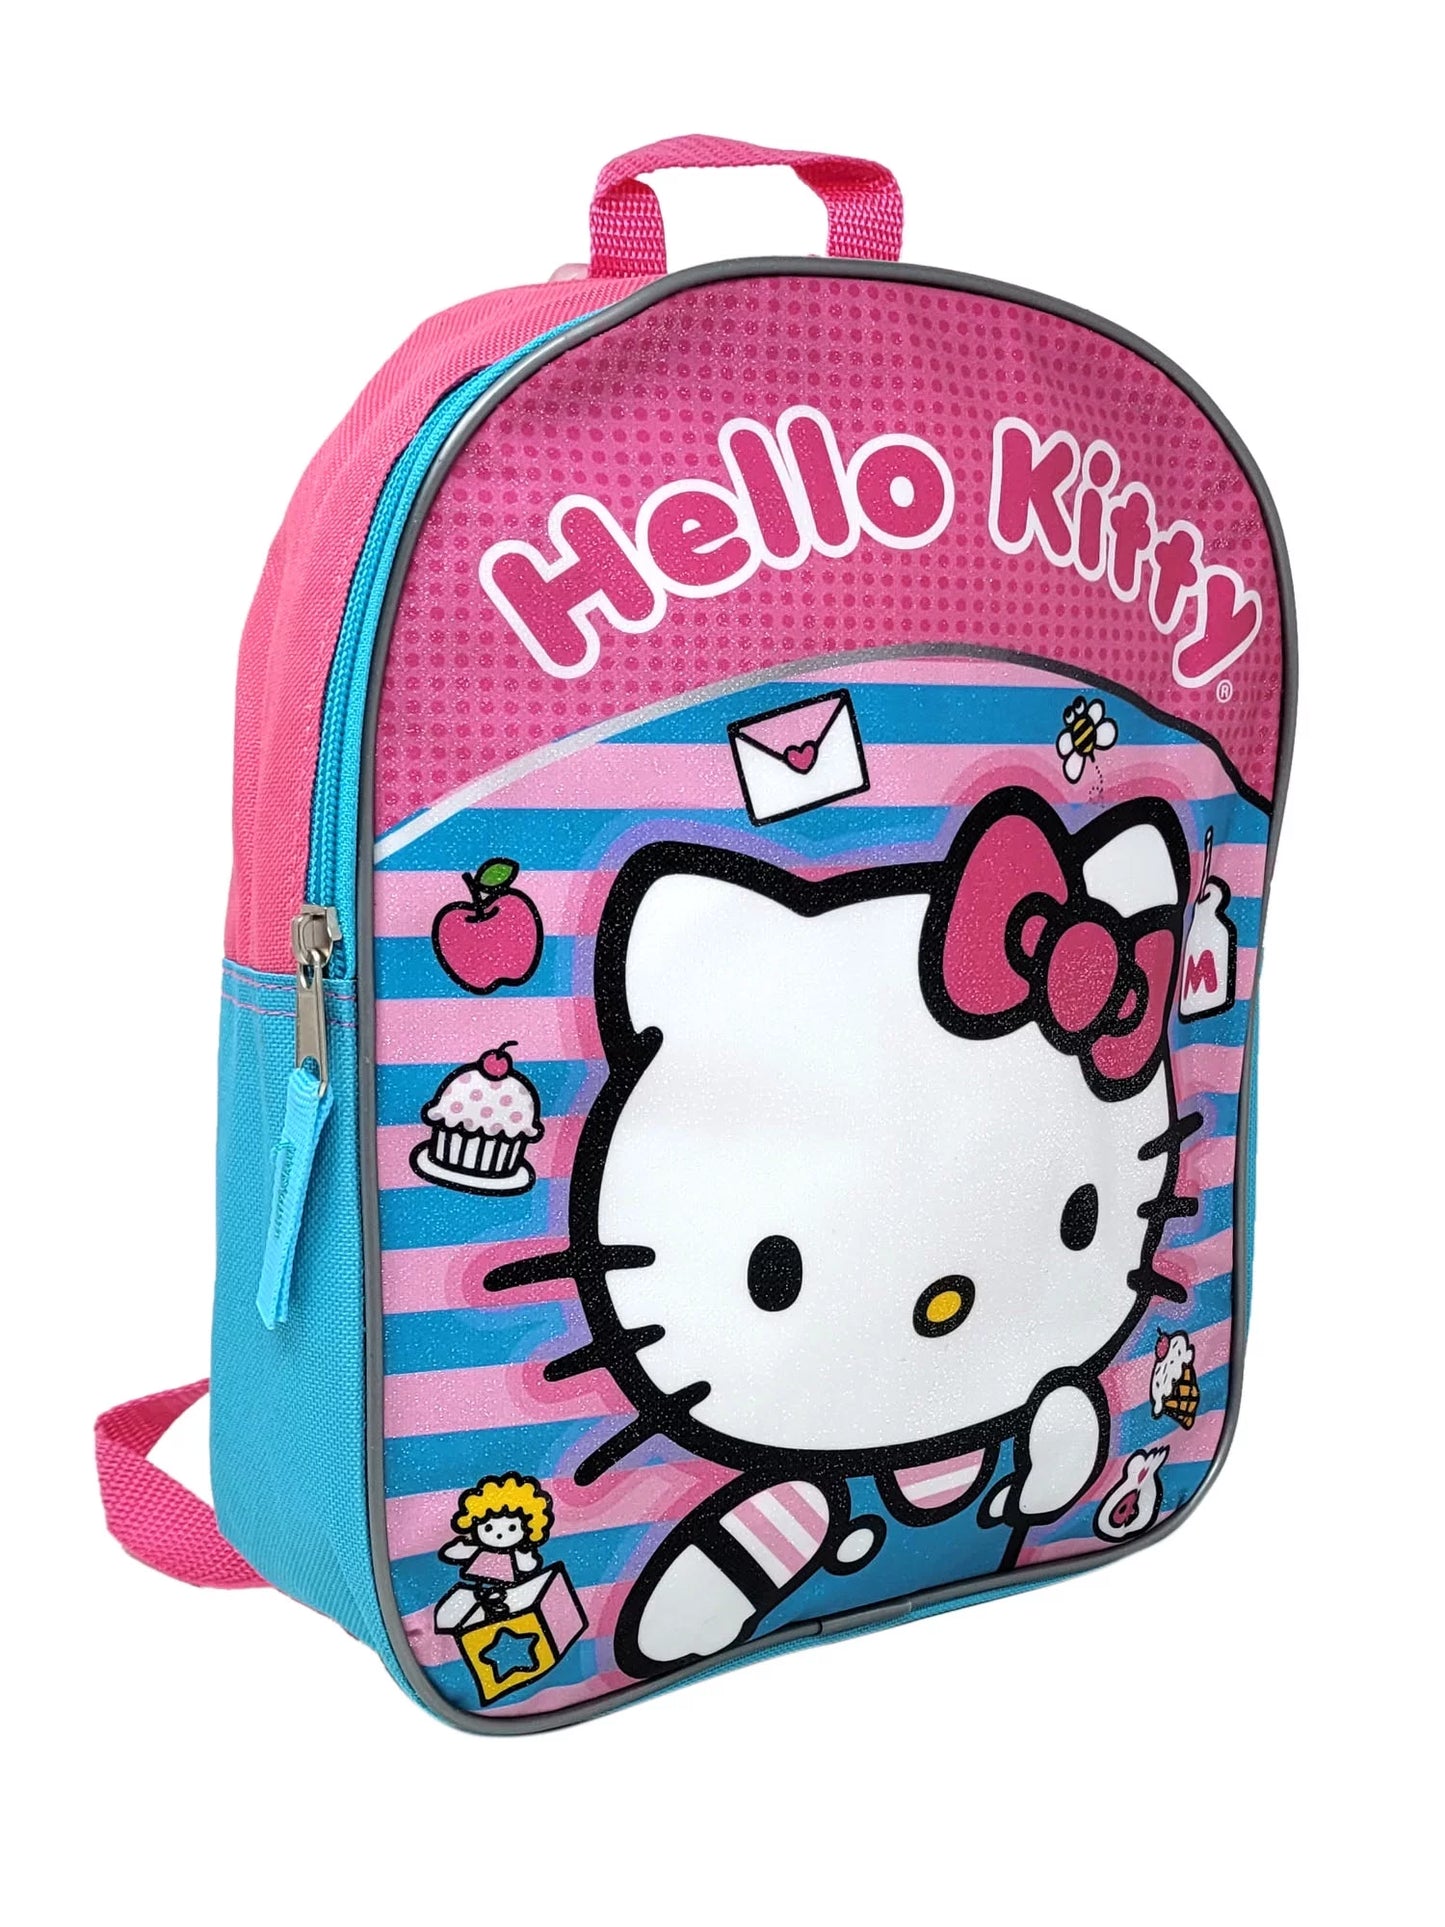 Backpack 11" Mini Toddler Sanrio Pink Teal Sweets Candy Girls Pink